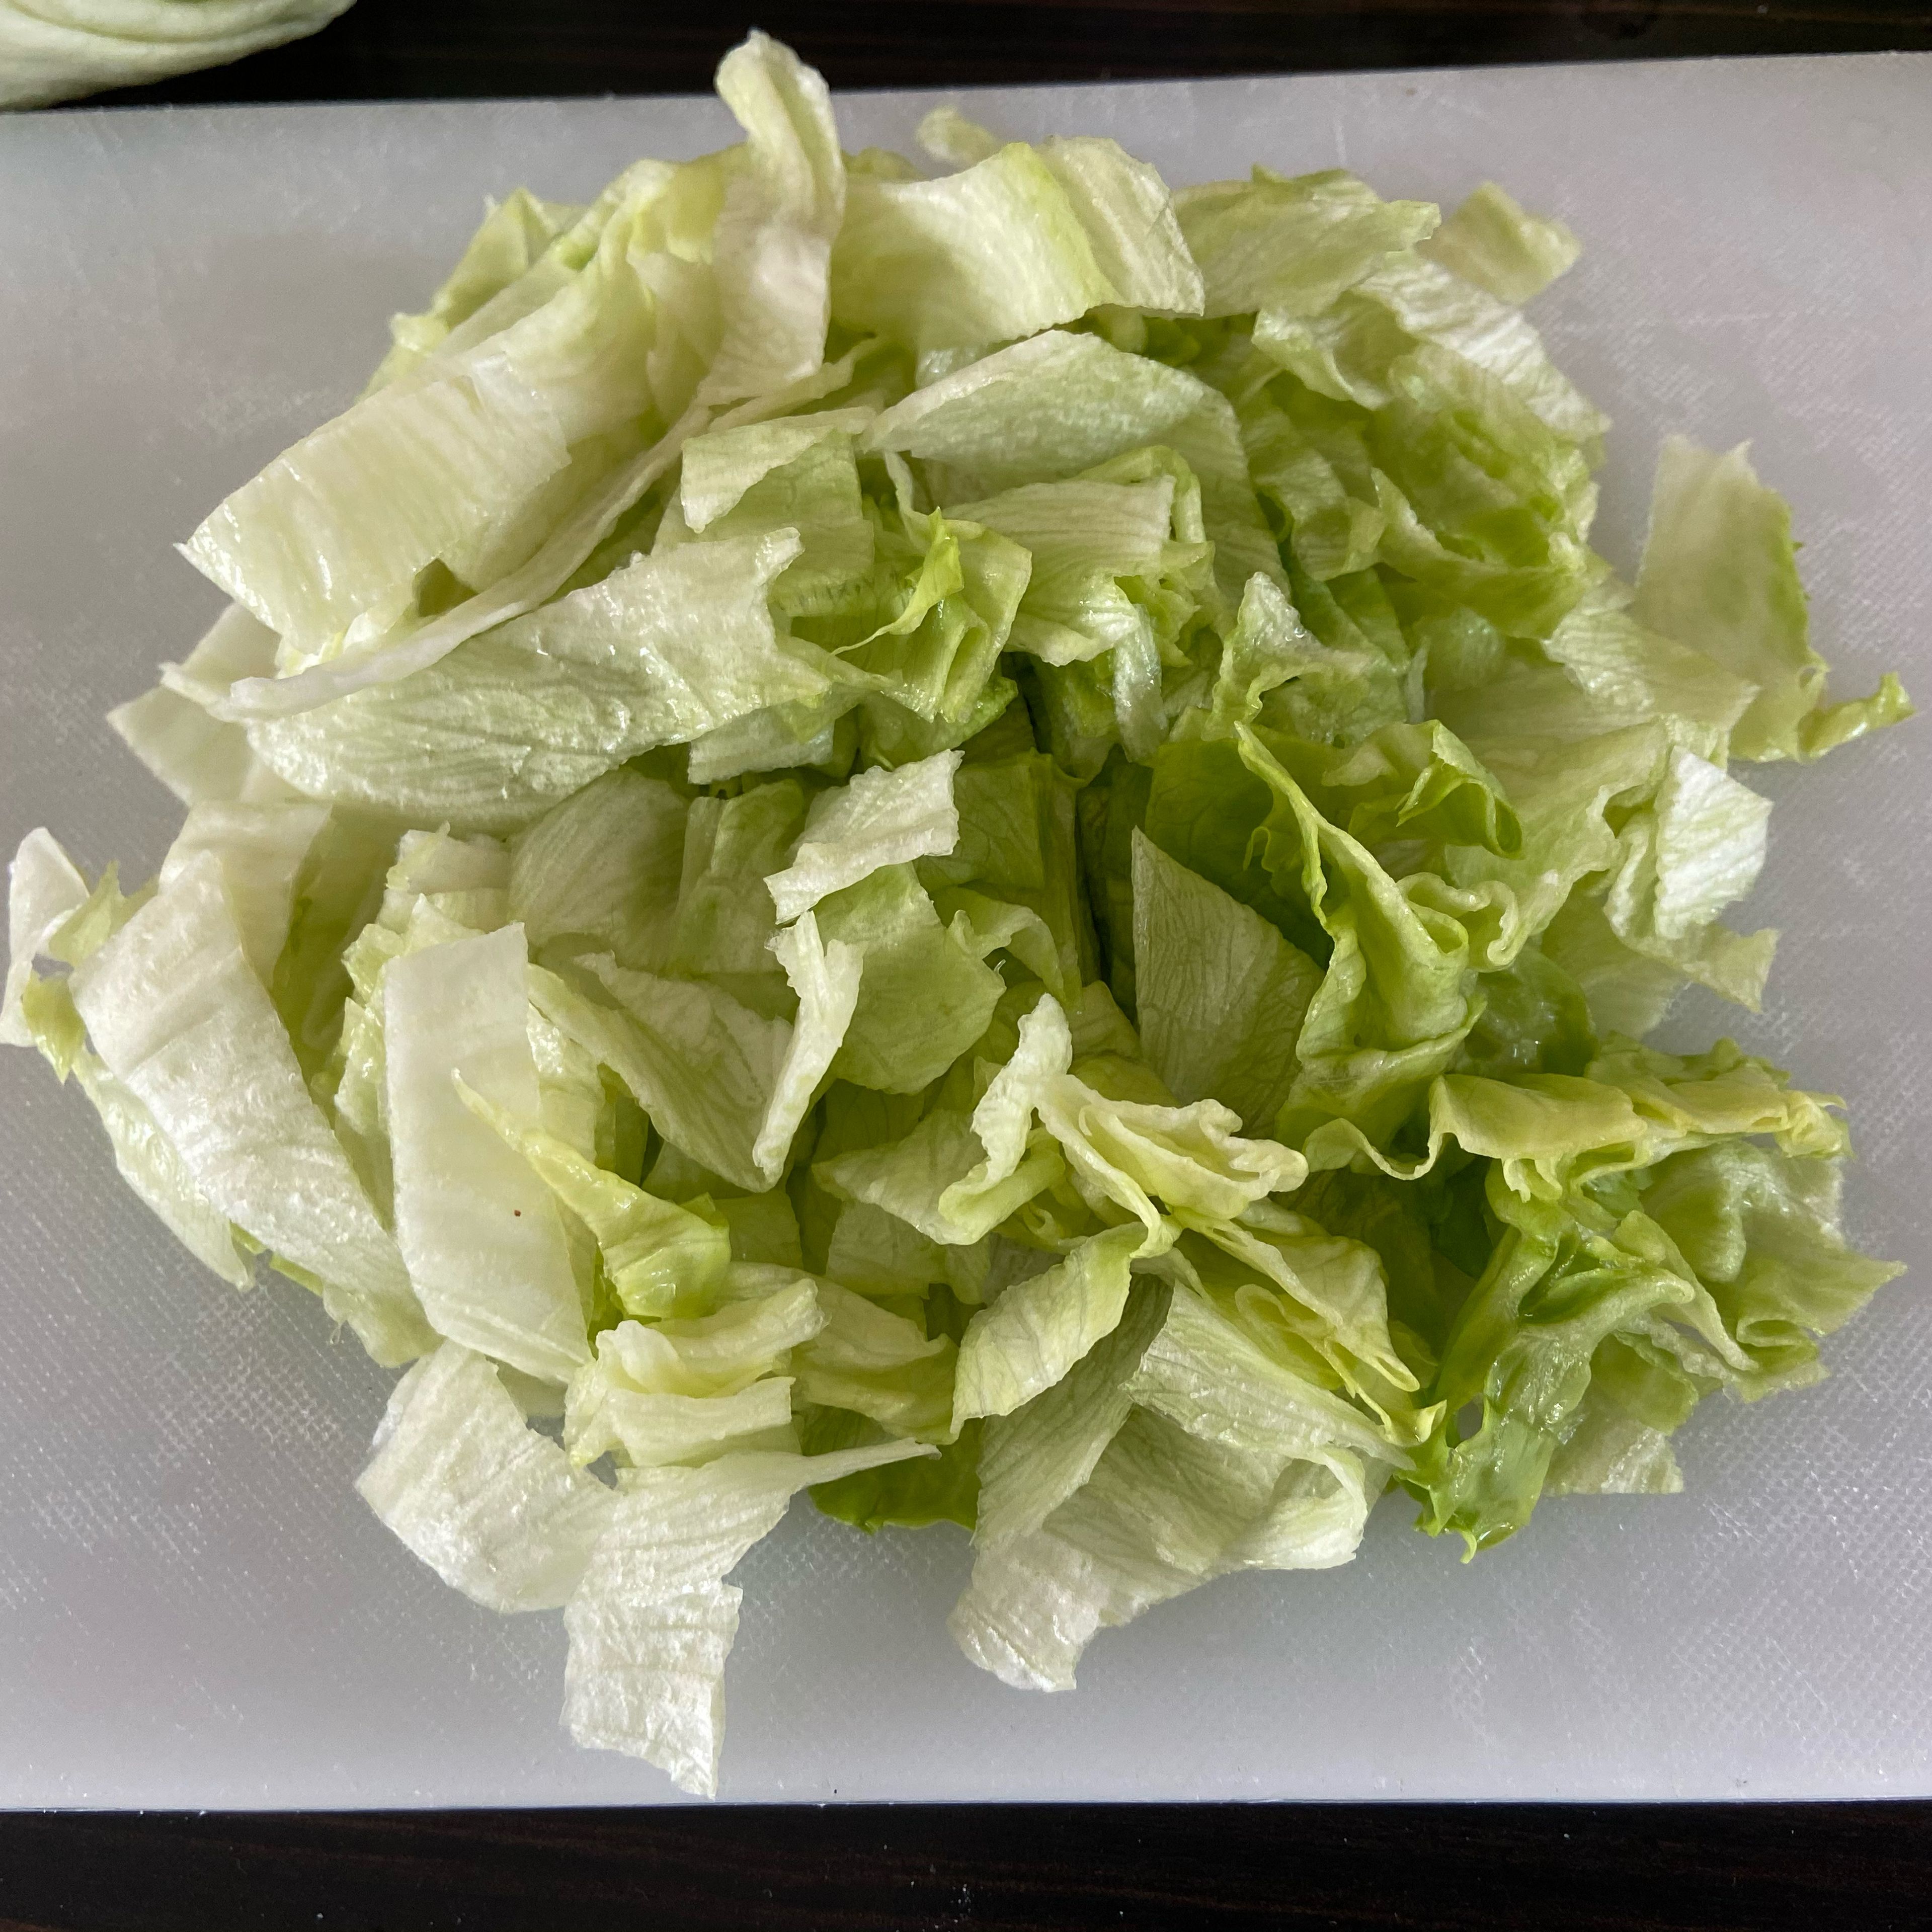 Slice the lettuce leaves to strips and add to the sauce, make sure it covers every piece and set a side. Slice the tomato to big round slices and set aside.